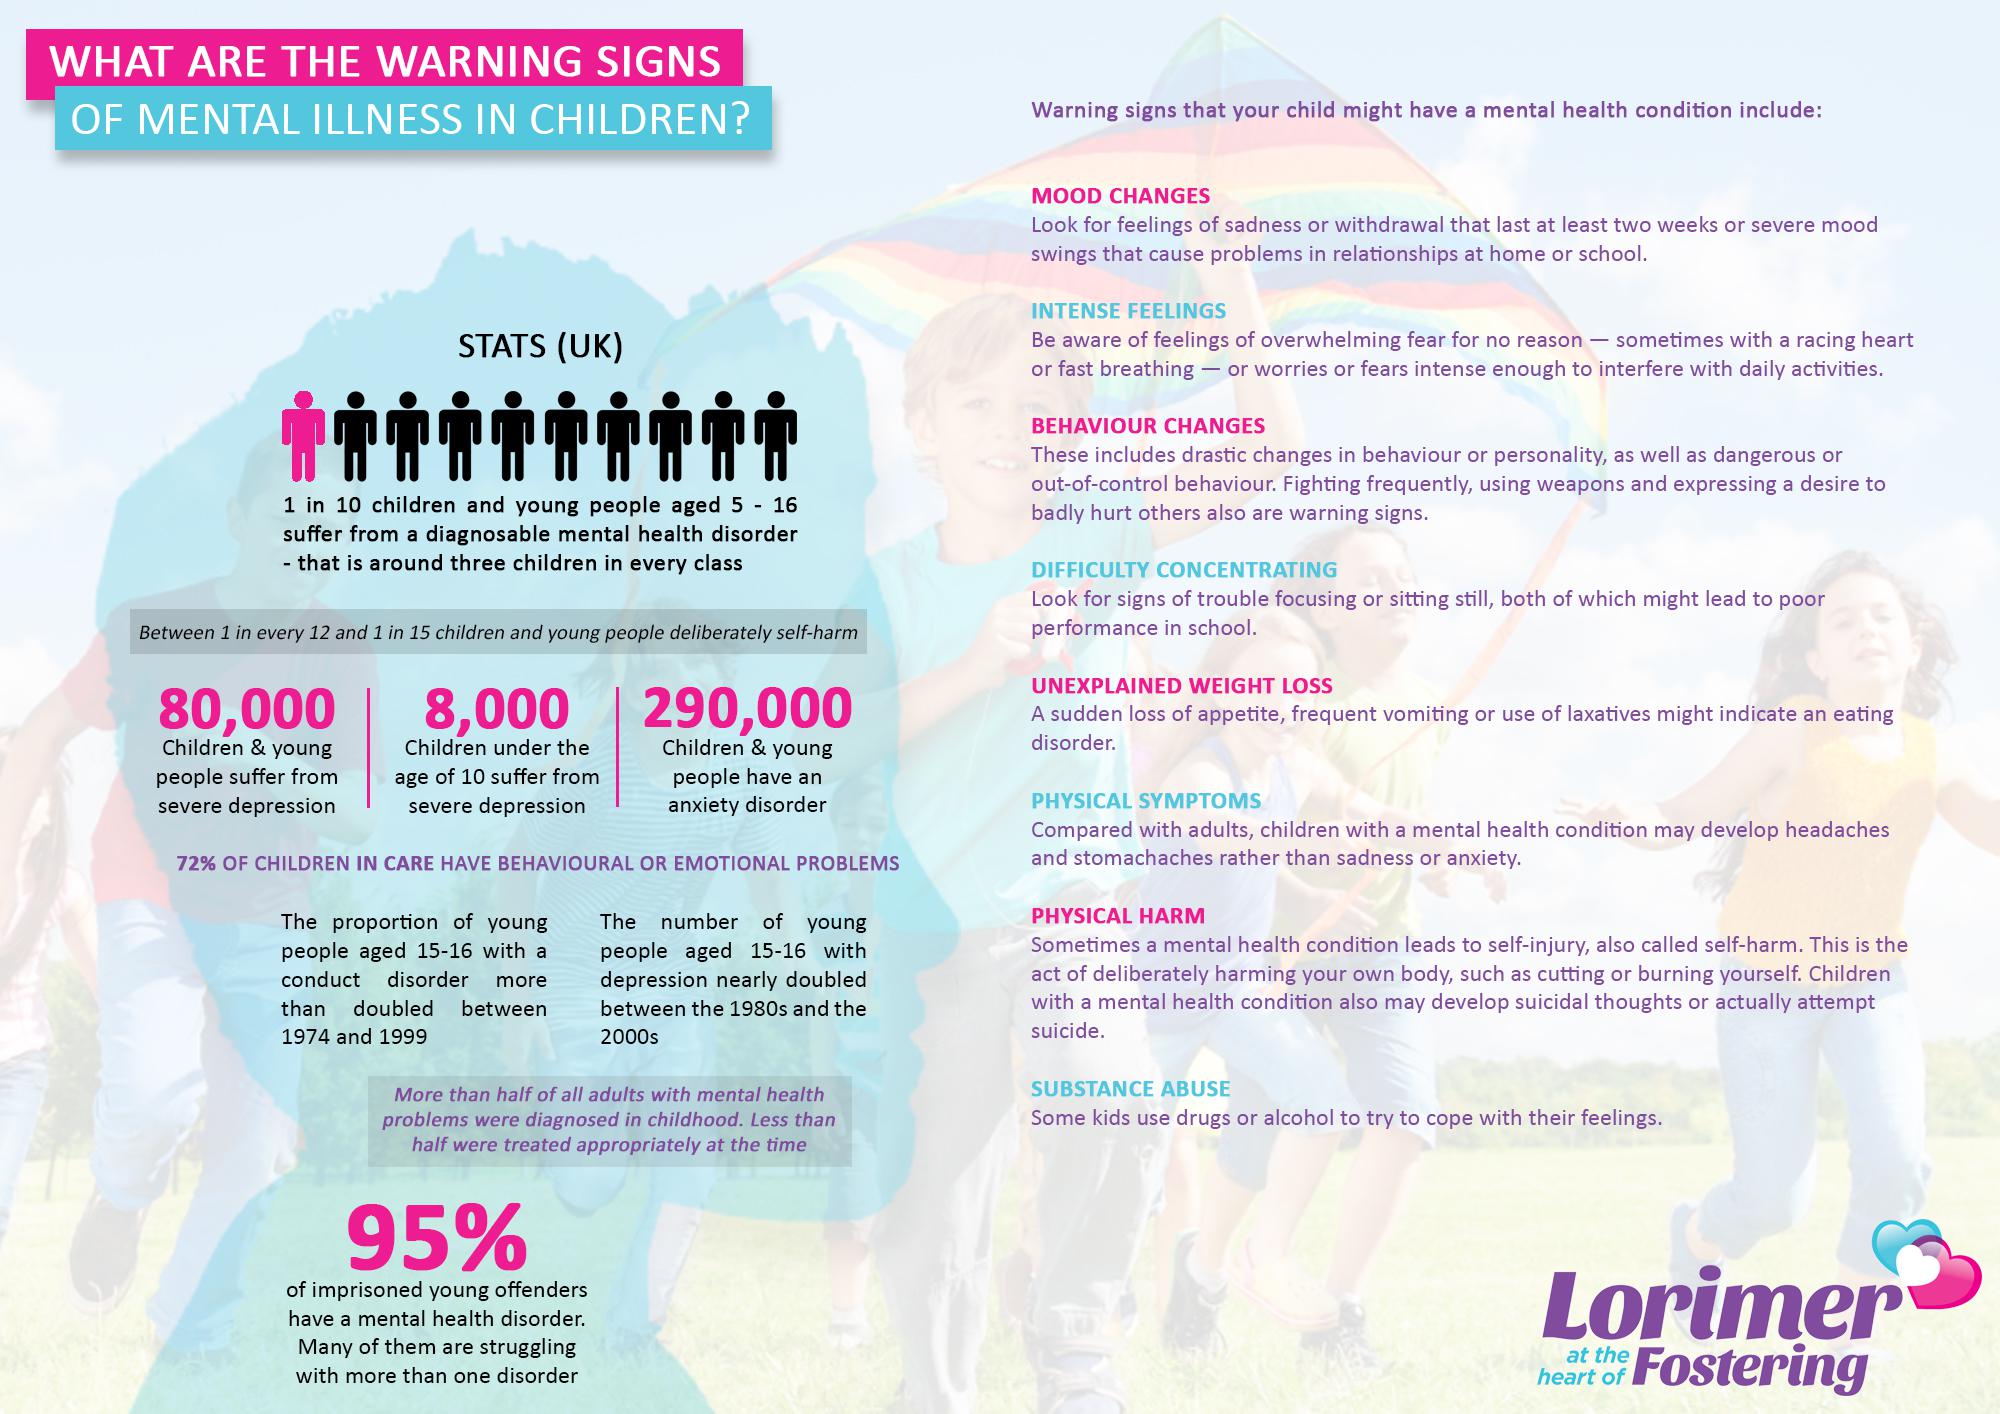 This infographic was created by www.lorimerfostering.com